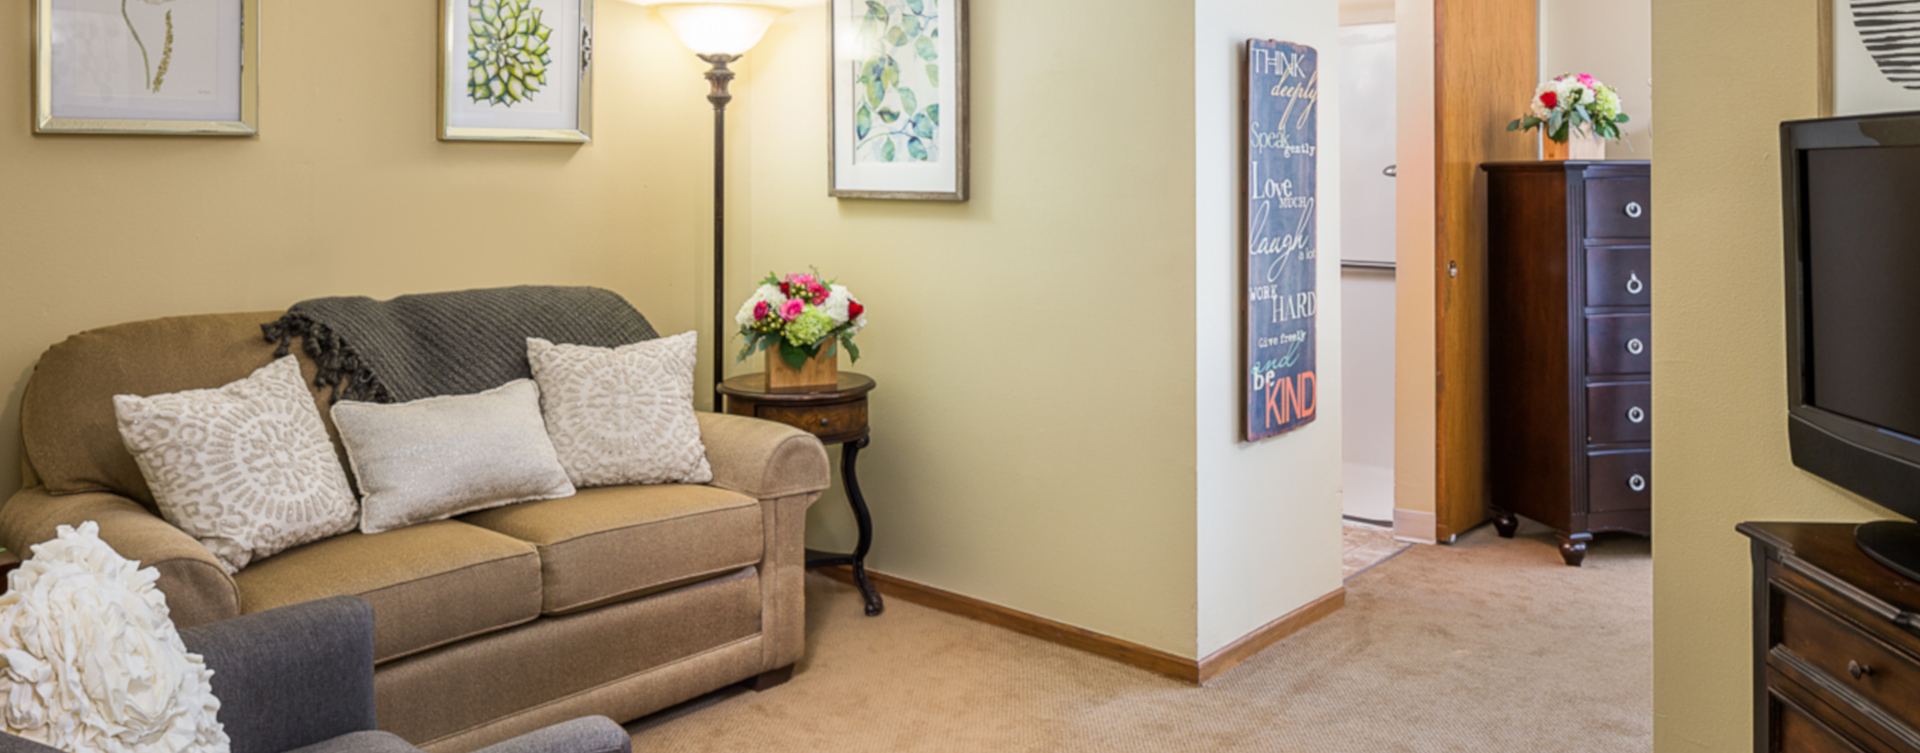 Get a new lease on life with a cozy apartment at Bickford of Grand Island